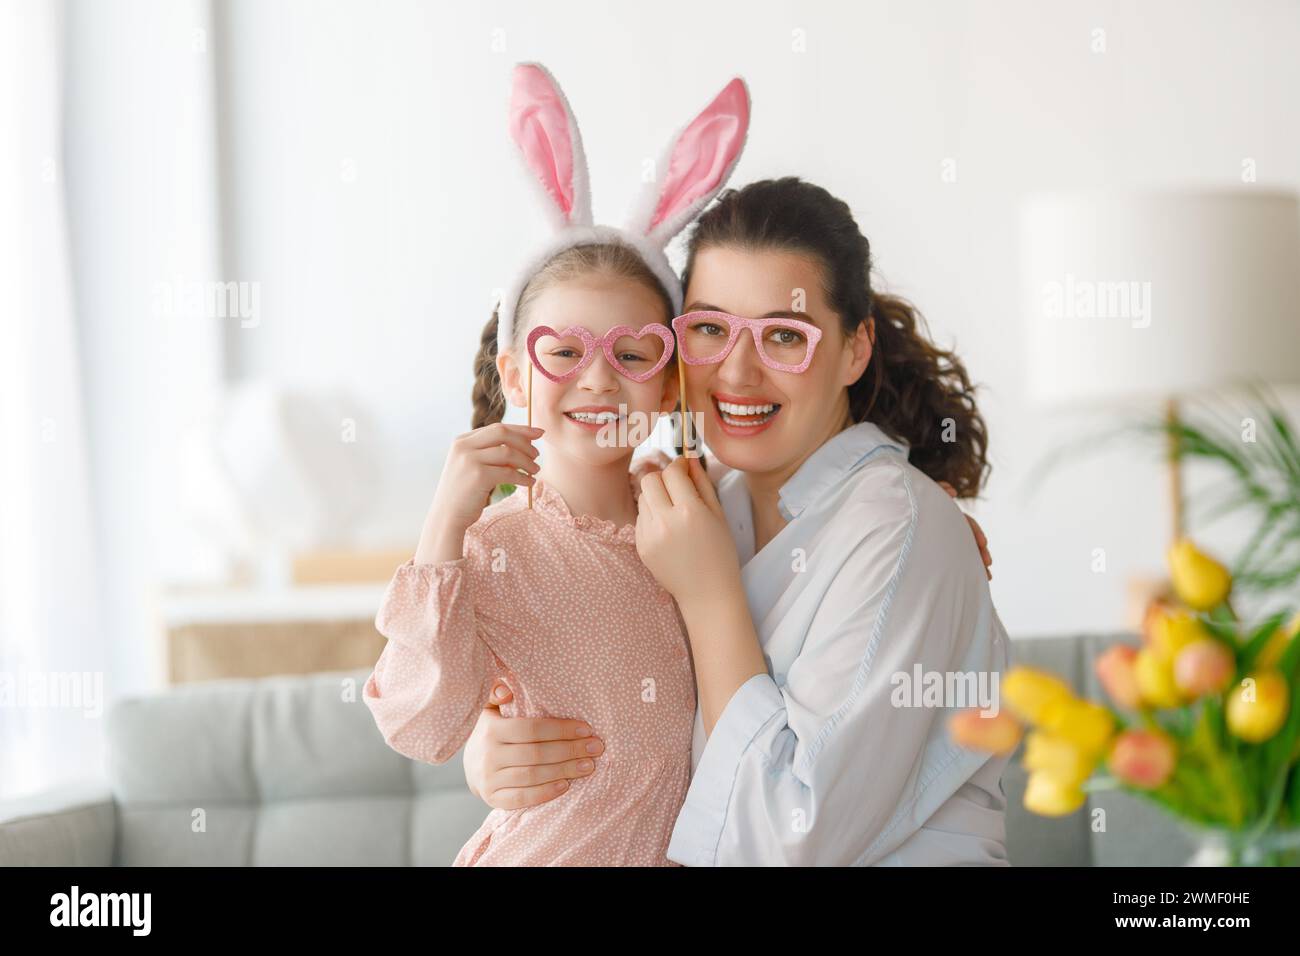 Happy holiday. Mother and her daughter. Family celebrating Easter. Cute little child girl is wearing bunny ears. Stock Photo